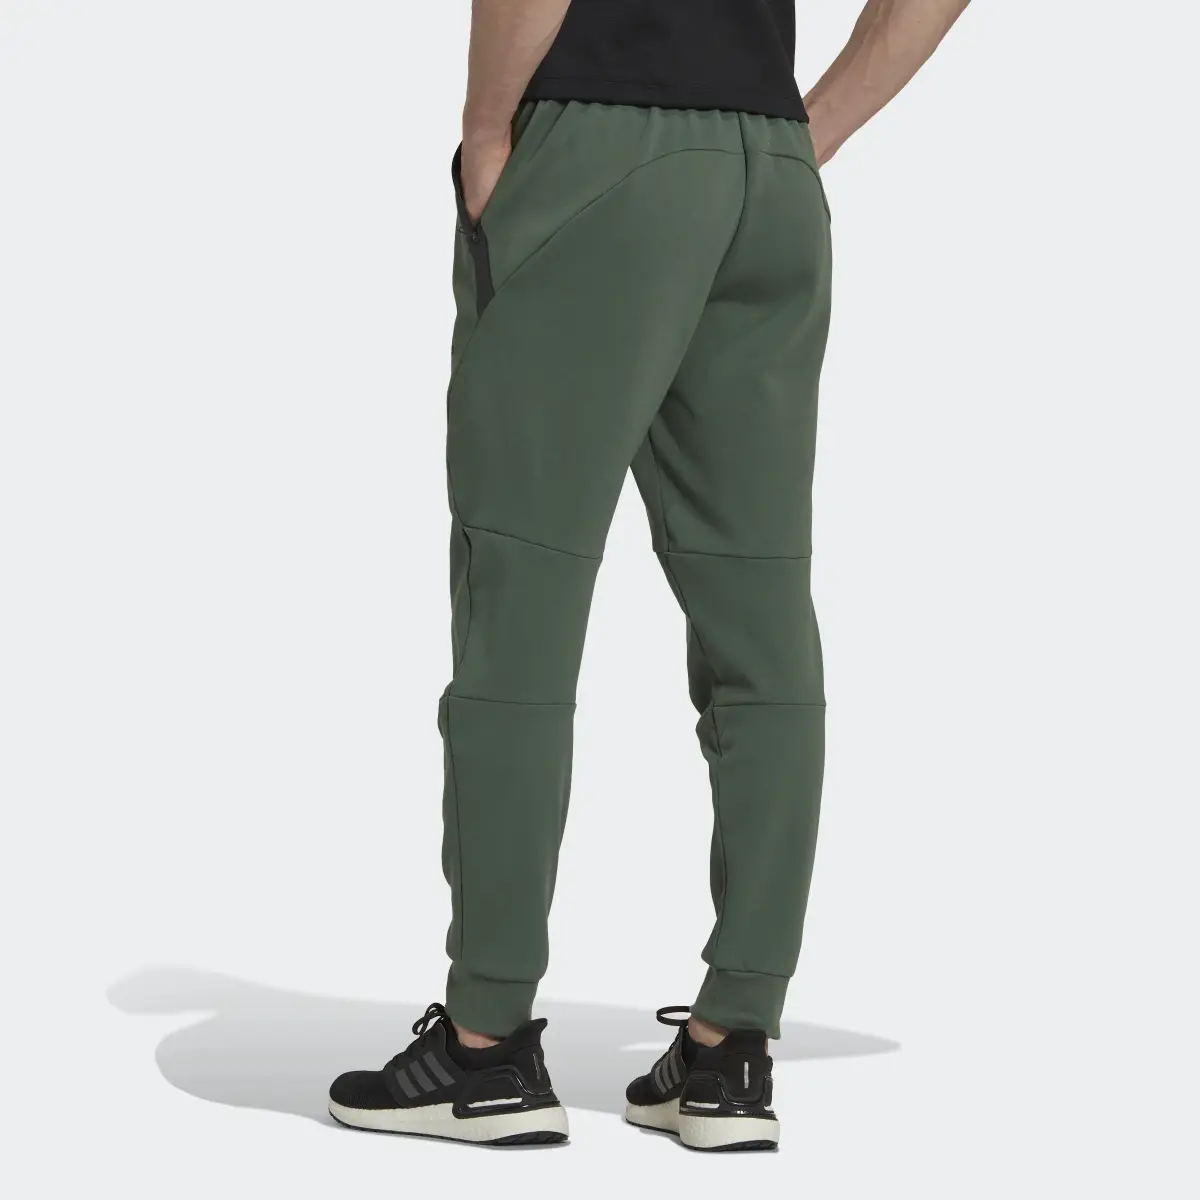 Adidas Designed for Gameday Joggers. 2